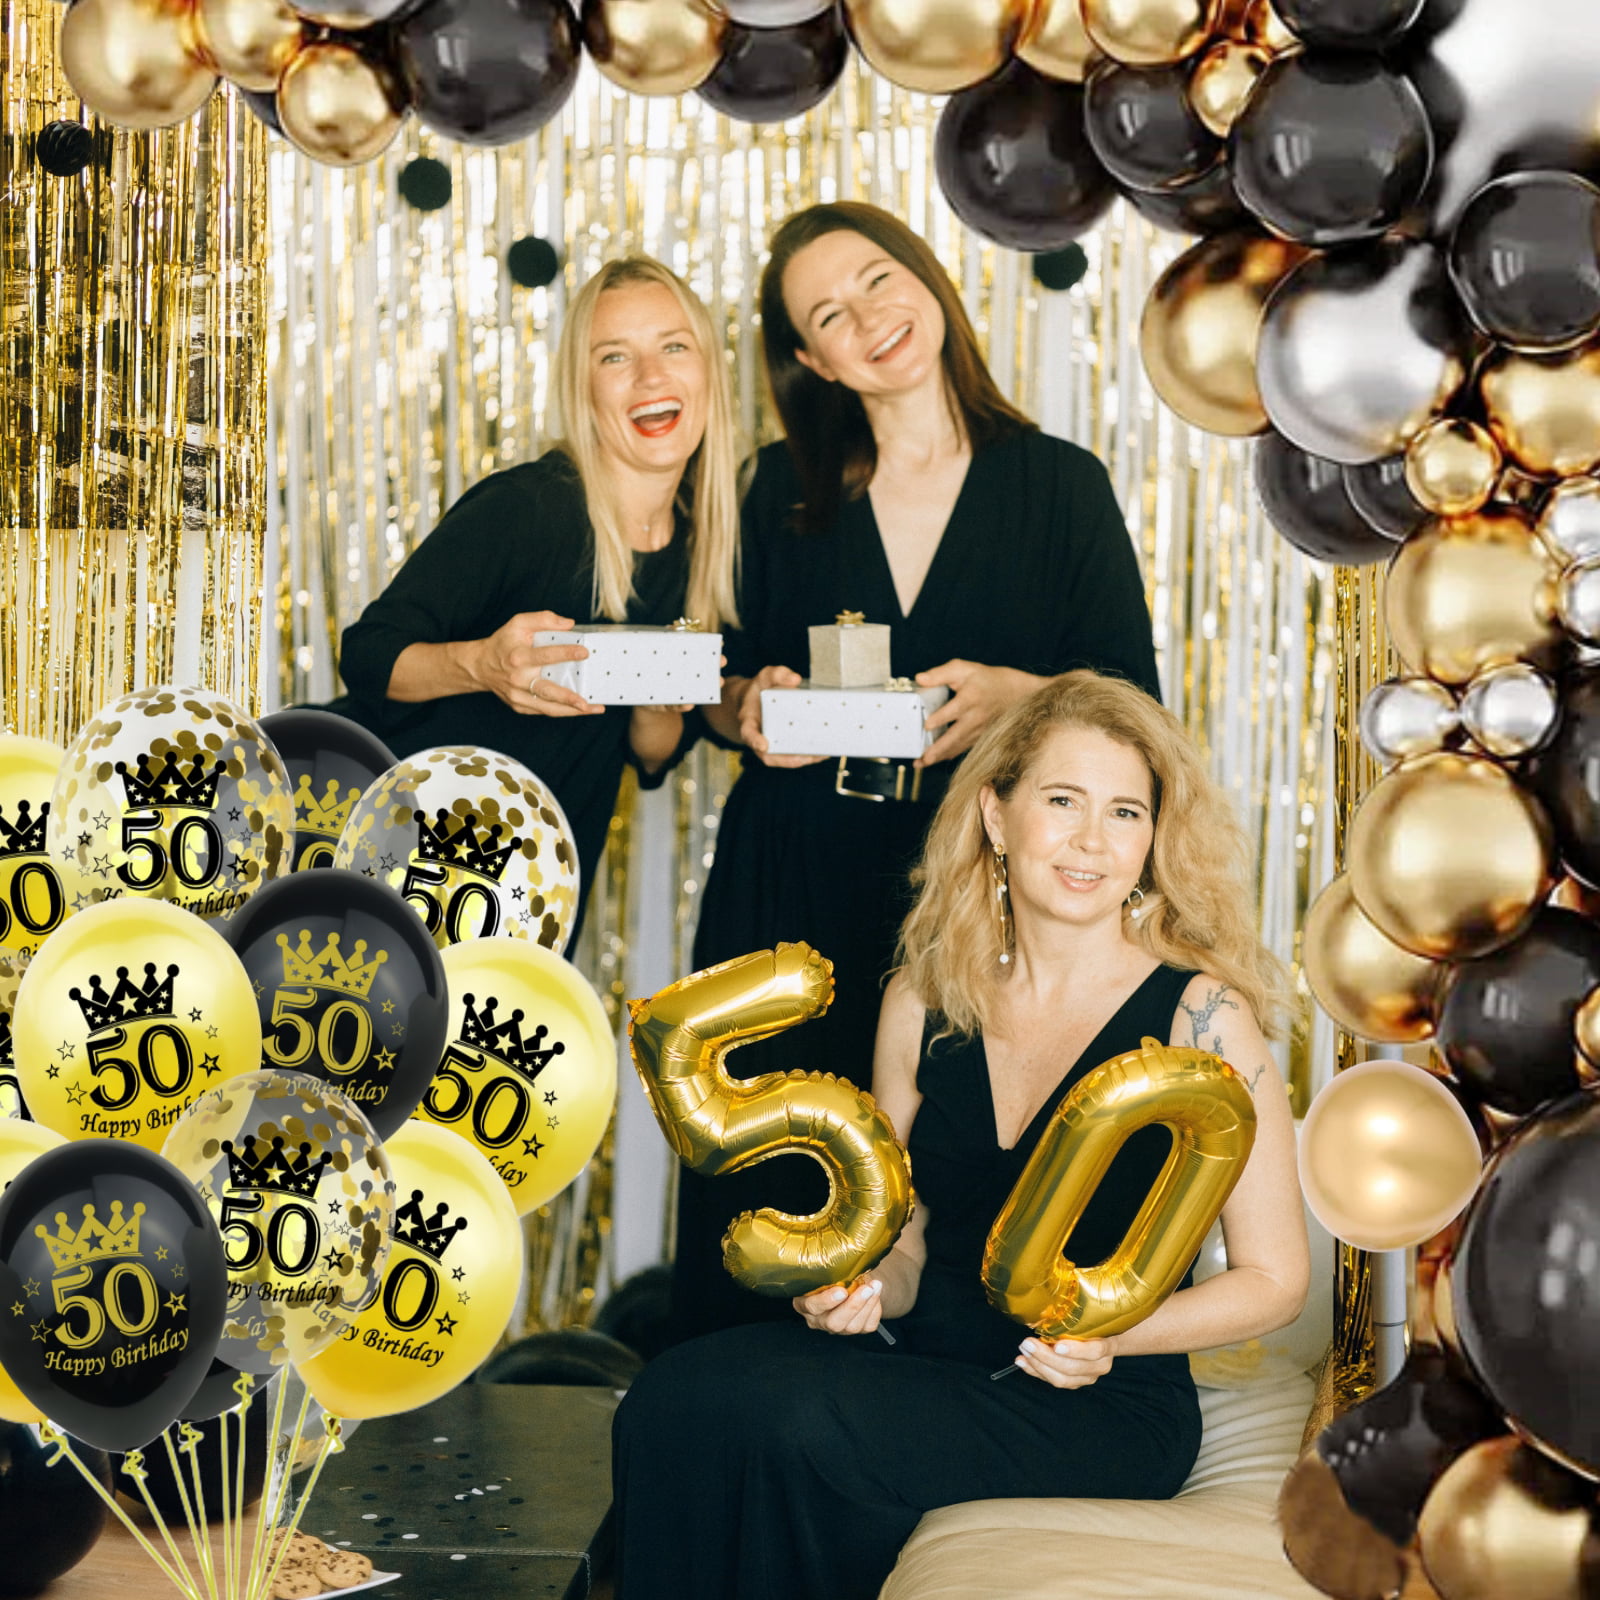  BEISHIDA 32pcs 1954 70th Birthday Balloons Gold and Black Party  Decorations 12 Inch Latex and Confetti Balloon Printed with Happy Birthday  for Women Men Birthday Party Decorations : Toys & Games